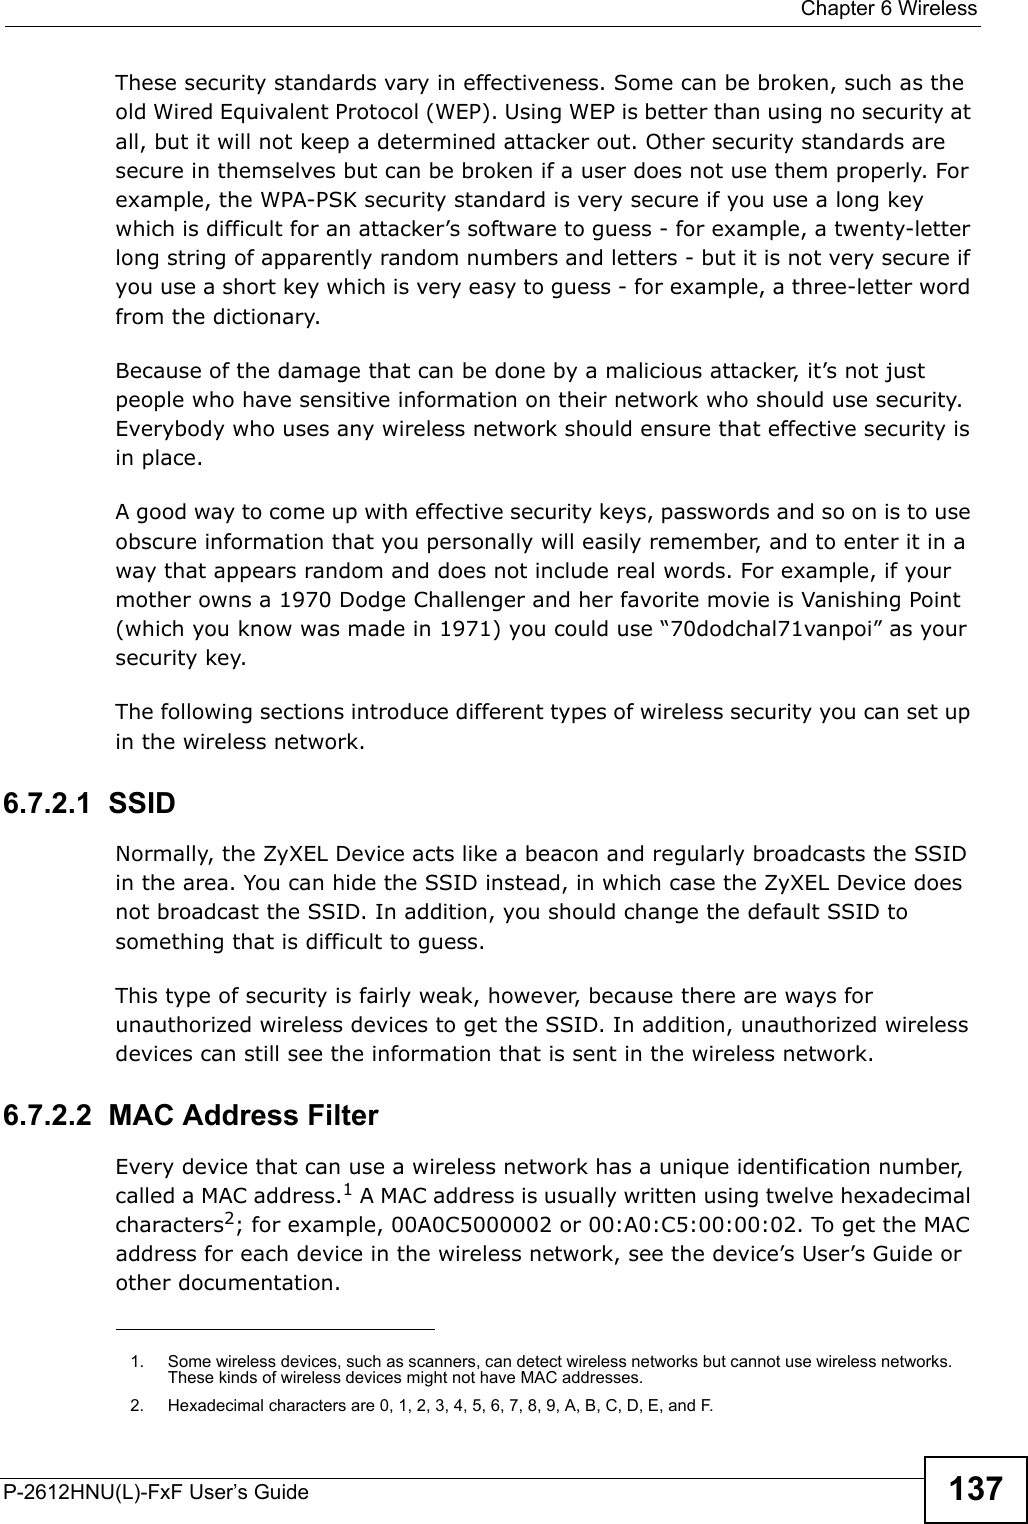  Chapter 6 WirelessP-2612HNU(L)-FxF User’s Guide 137These security standards vary in effectiveness. Some can be broken, such as the old Wired Equivalent Protocol (WEP). Using WEP is better than using no security atall, but it will not keep a determined attacker out. Other security standards are secure in themselves but can be broken if a user does not use them properly. For example, the WPA-PSK security standard is very secure if you use a long key which is difficult for an attacker’s software to guess - for example, a twenty-letter long string of apparently random numbers and letters - but it is not very secure ifyou use a short key which is very easy to guess - for example, a three-letter word from the dictionary.Because of the damage that can be done by a malicious attacker, it’s not justpeople who have sensitive information on their network who should use security. Everybody who uses any wireless network should ensure that effective security isin place.A good way to come up with effective security keys, passwords and so on is to use obscure information that you personally will easily remember, and to enter it in a way that appears random and does not include real words. For example, if your mother owns a 1970 Dodge Challenger and her favorite movie is Vanishing Point (which you know was made in 1971) you could use “70dodchal71vanpoi” as your security key.The following sections introduce different types of wireless security you can set up in the wireless network.6.7.2.1  SSIDNormally, the ZyXEL Device acts like a beacon and regularly broadcasts the SSID in the area. You can hide the SSID instead, in which case the ZyXEL Device does not broadcast the SSID. In addition, you should change the default SSID to something that is difficult to guess.This type of security is fairly weak, however, because there are ways for unauthorized wireless devices to get the SSID. In addition, unauthorized wirelessdevices can still see the information that is sent in the wireless network.6.7.2.2  MAC Address FilterEvery device that can use a wireless network has a unique identification number, called a MAC address.1A MAC address is usually written using twelve hexadecimal characters2; for example, 00A0C5000002 or 00:A0:C5:00:00:02. To get the MAC address for each device in the wireless network, see the device’s User’s Guide or other documentation.1. Some wireless devices, such as scanners, can detect wireless networks but cannot use wireless networks. These kinds of wireless devices might not have MAC addresses.2. Hexadecimal characters are 0, 1, 2, 3, 4, 5, 6, 7, 8, 9, A, B, C, D, E, and F.